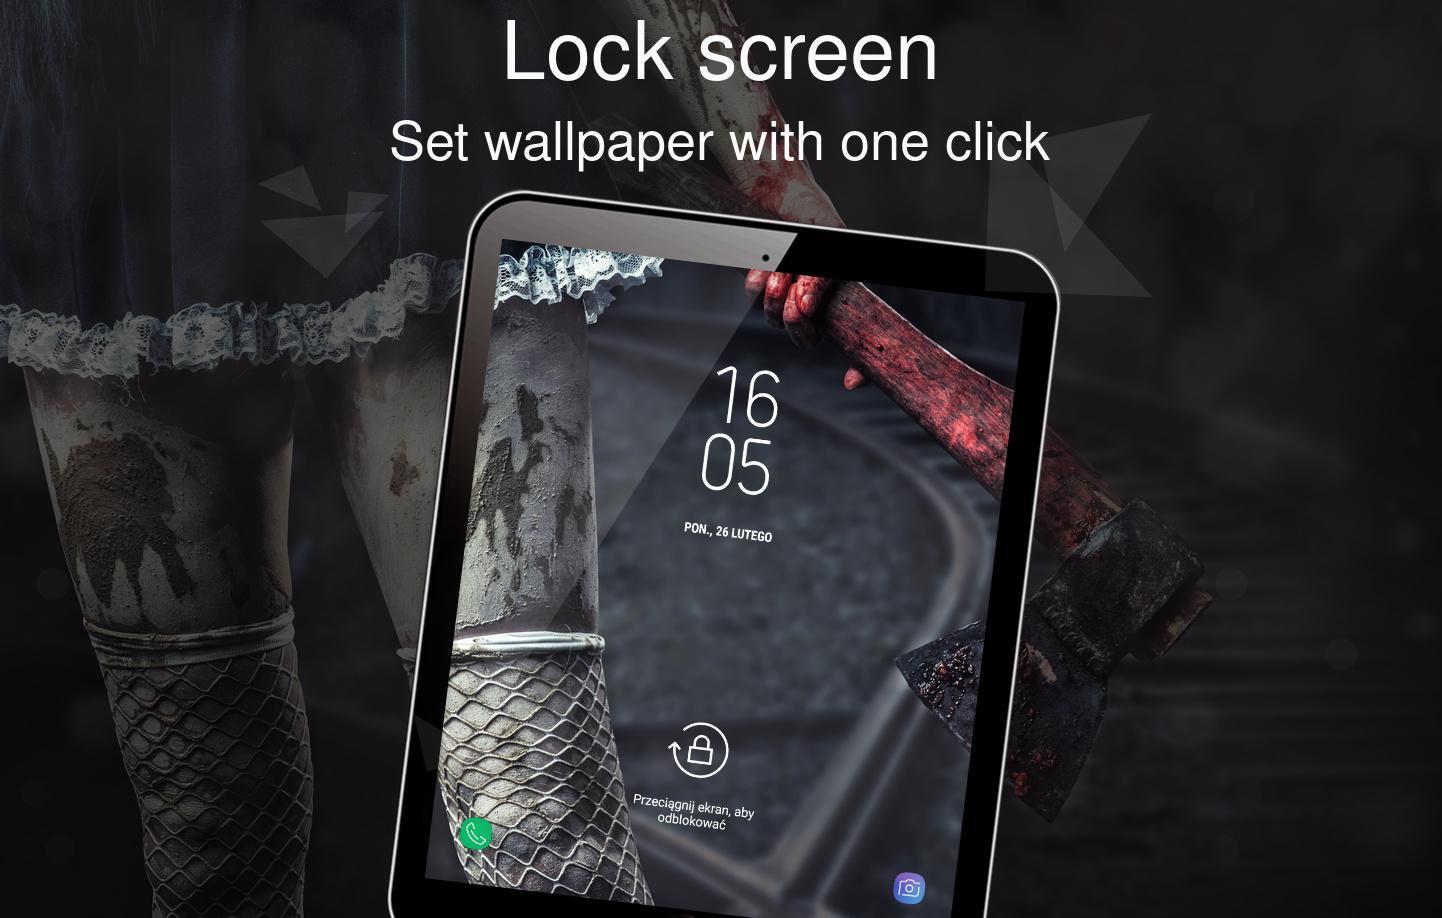 Horror wallpapers 4k for Android - APK Download